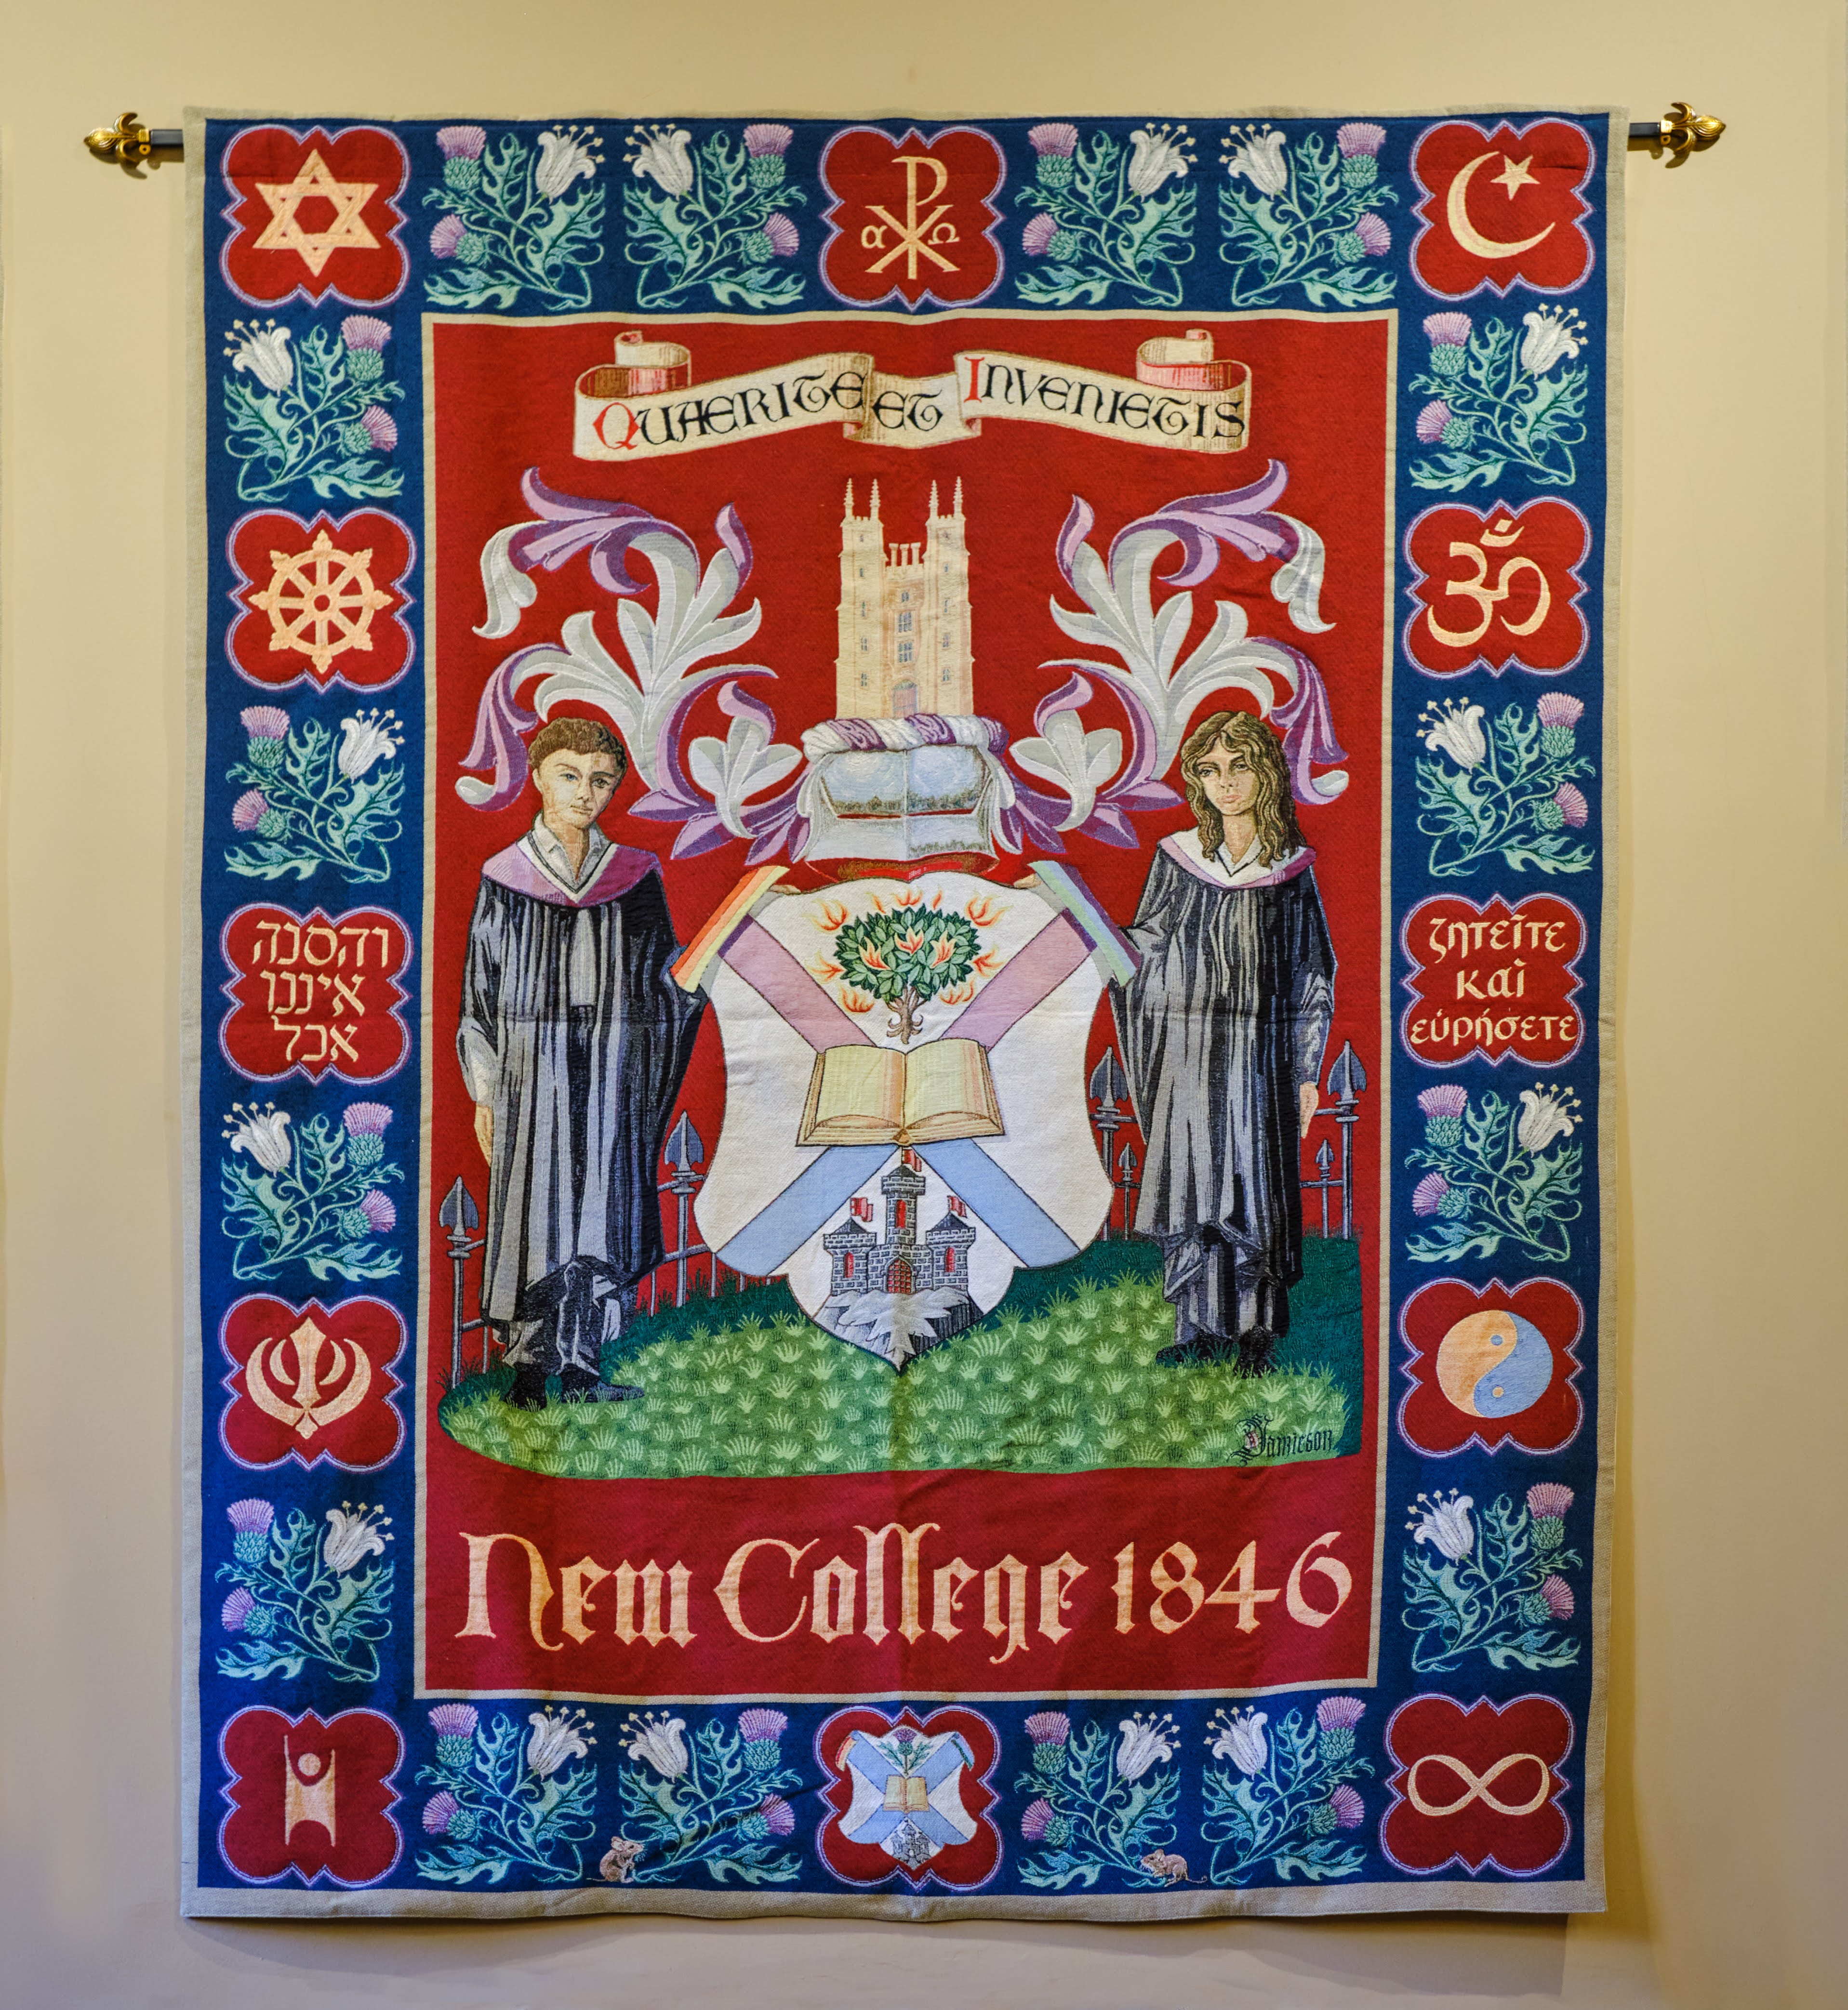 Colour photo of the New College Coat of Arms tapestry hanging up in the Rainy Hall